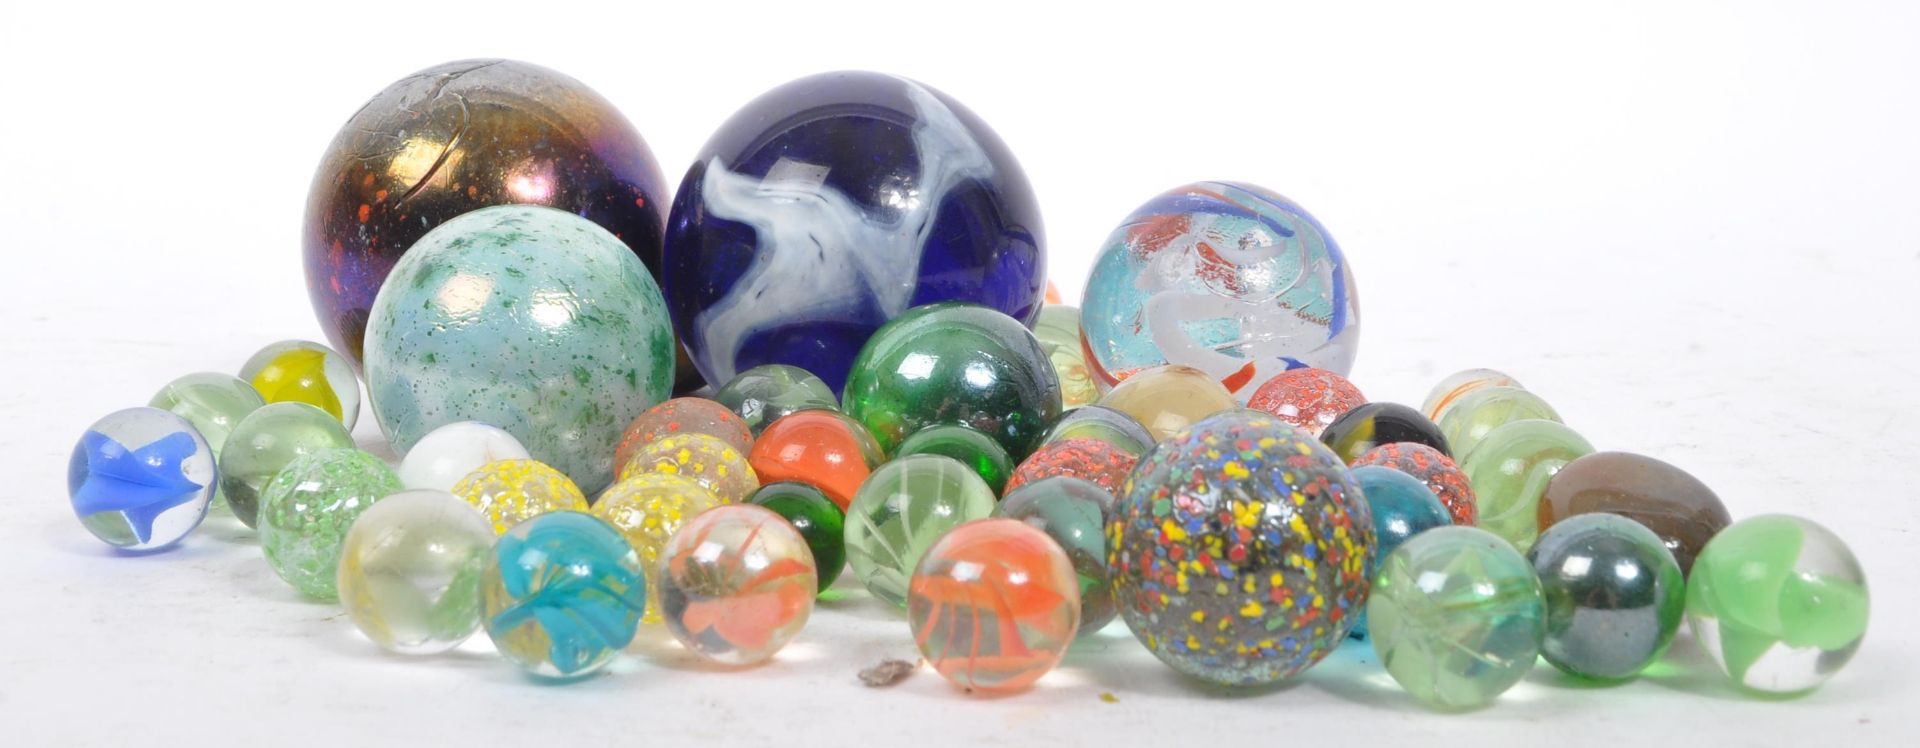 COLLECTION OF 20TH CENTURY GLASS MARBLES - Image 2 of 4